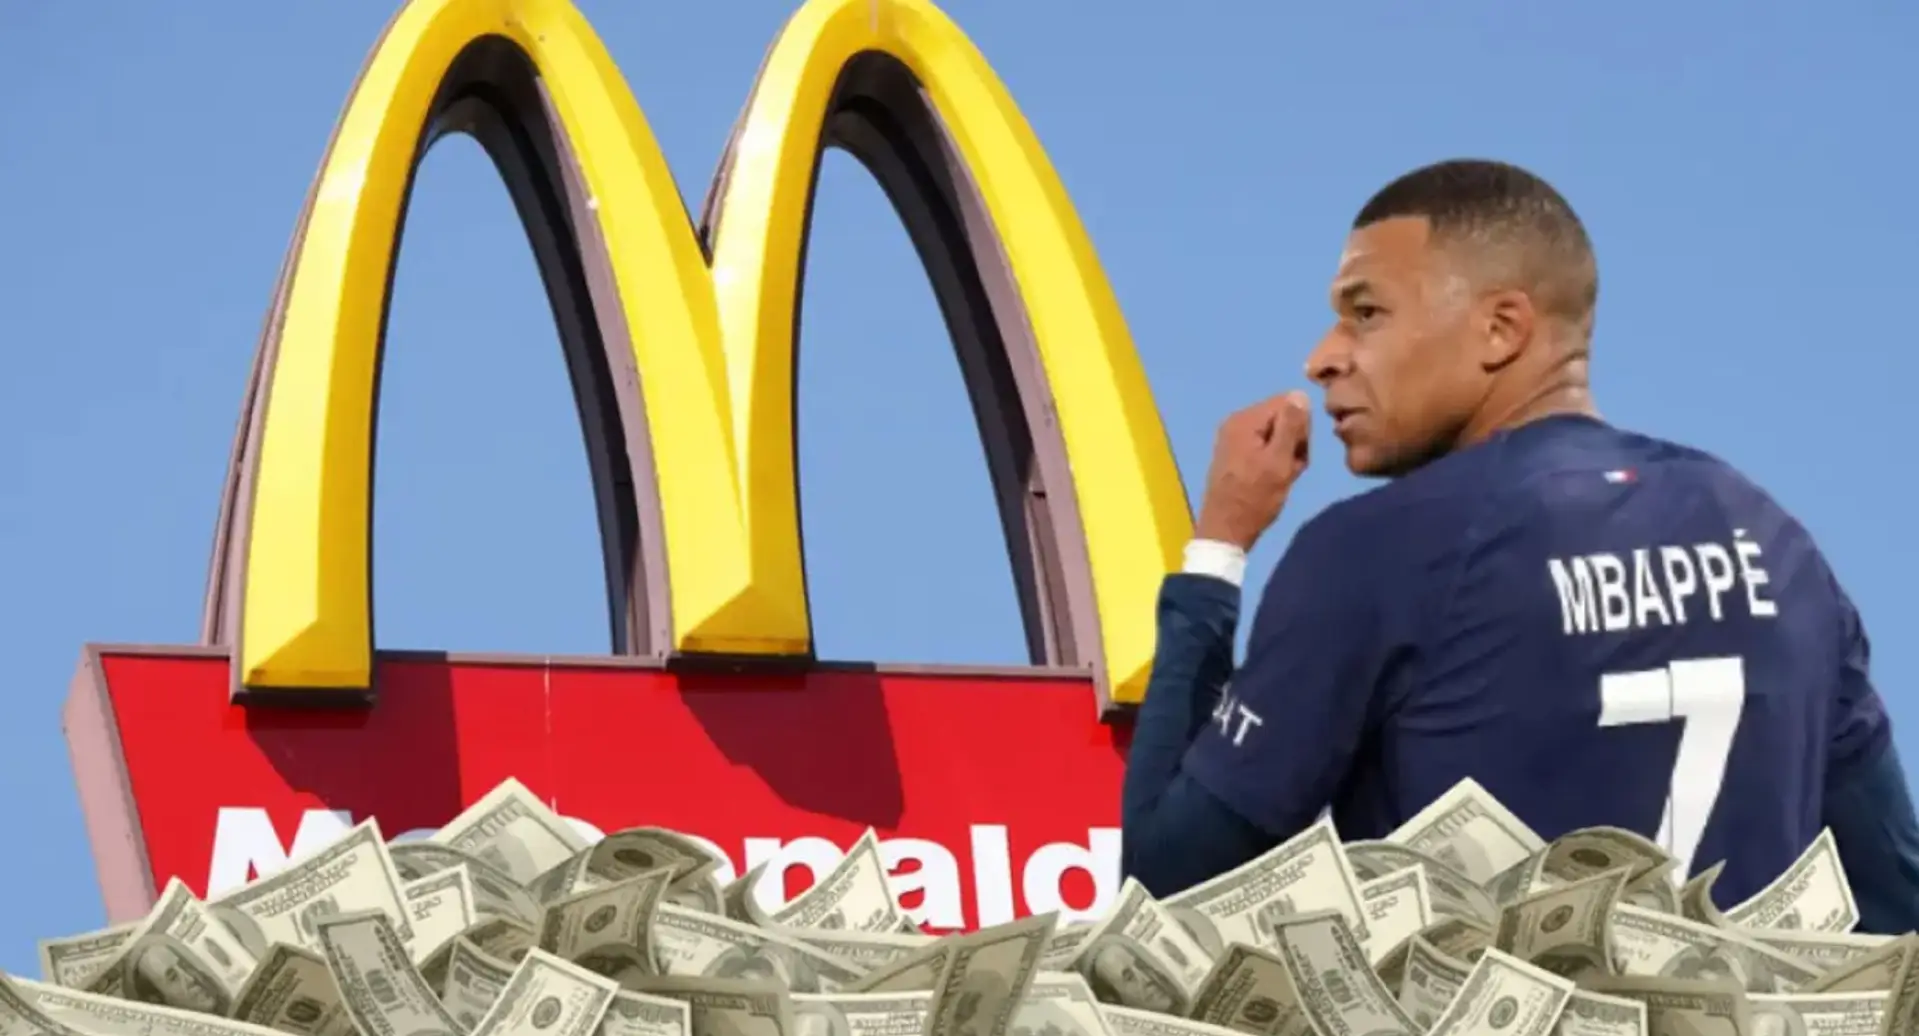 Mbappe to play in McDonald's league next year IF he doesn't join Real Madrid